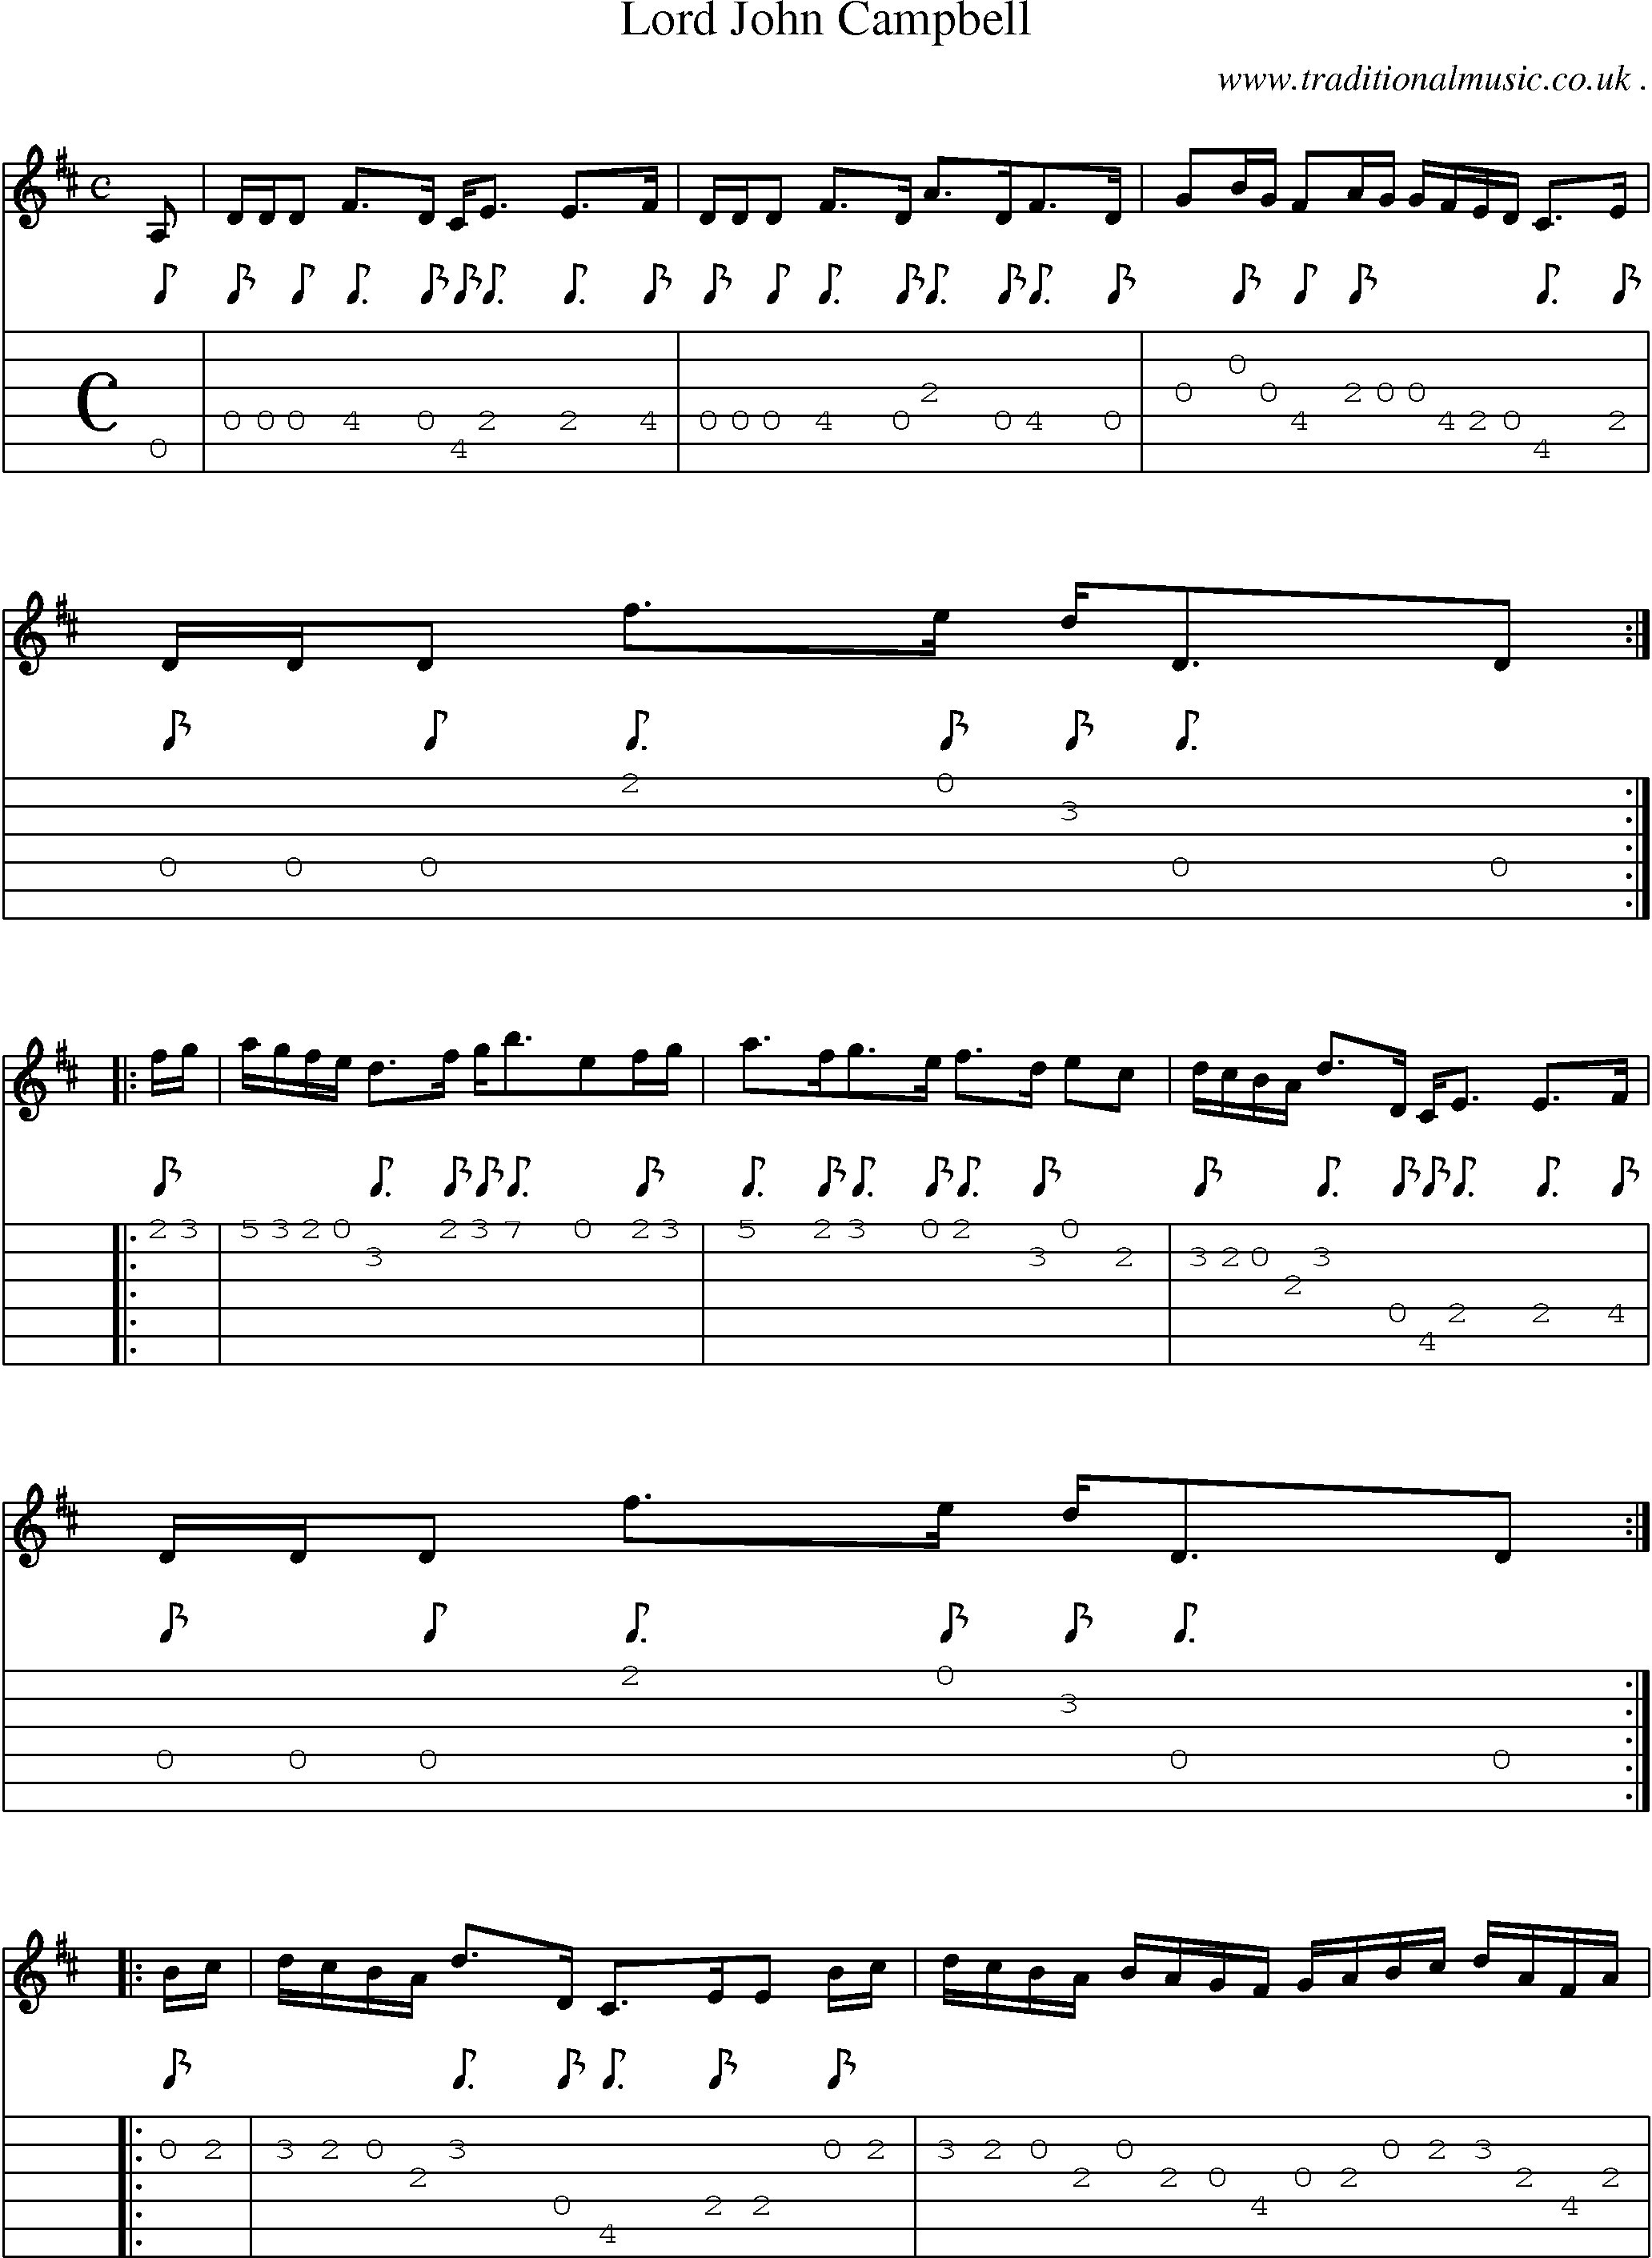 Sheet-music  score, Chords and Guitar Tabs for Lord John Campbell